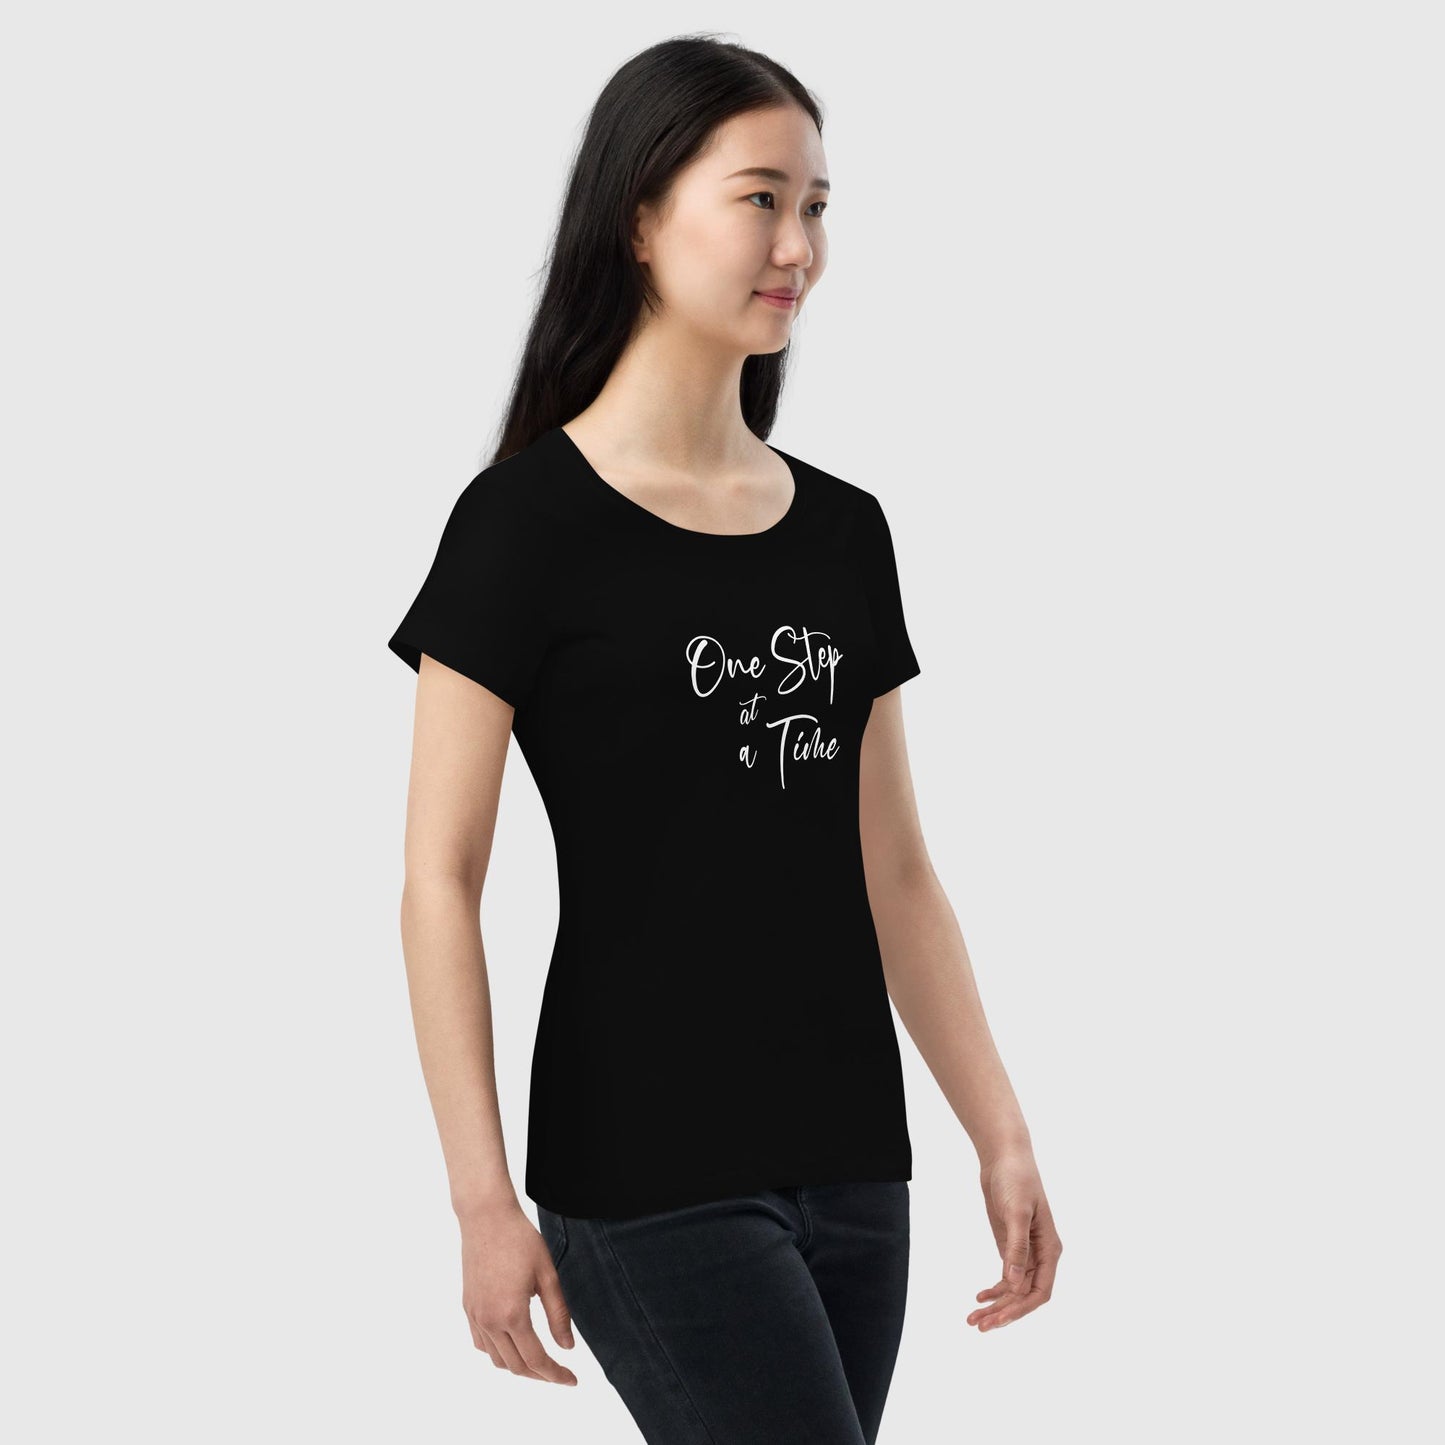 Women's black organic cotton t-shirt that features the inspirational quote, "One Step At A Time."